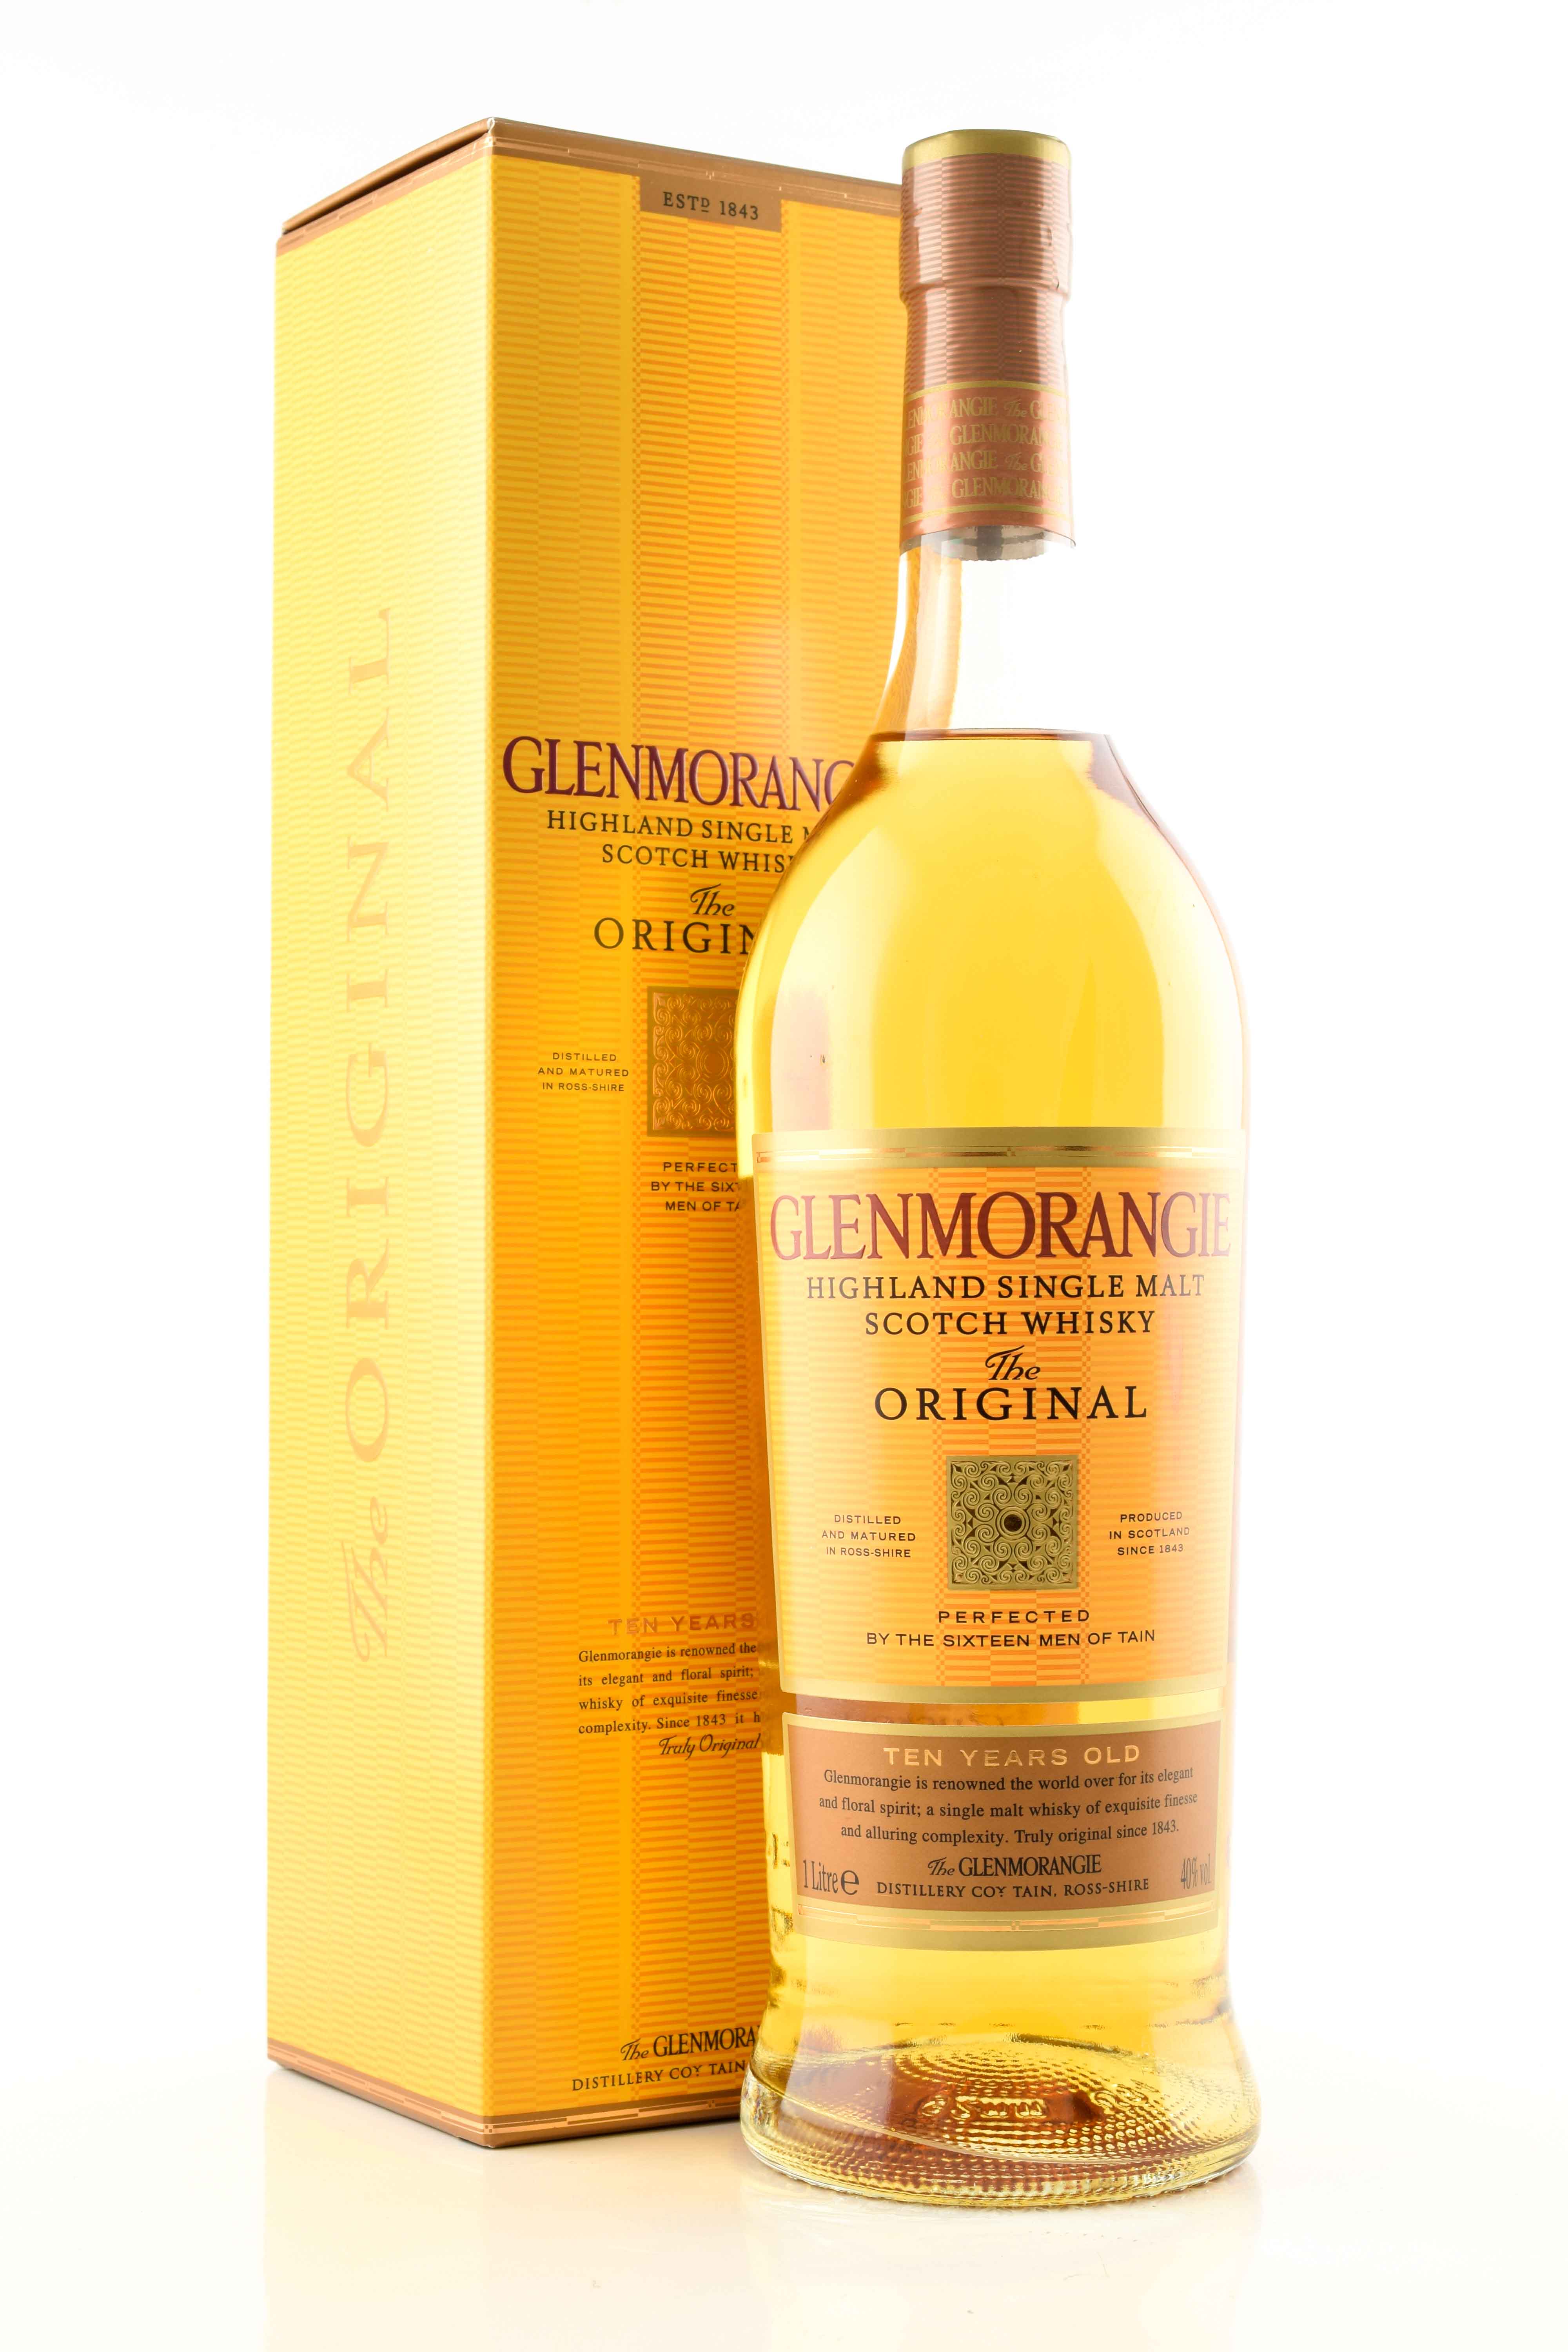 Home of The | Highlands 40% | | | | Countries Glenmorangie Whisky Year Original vol. Whisky Scotch Old 10 Malts 1.0L